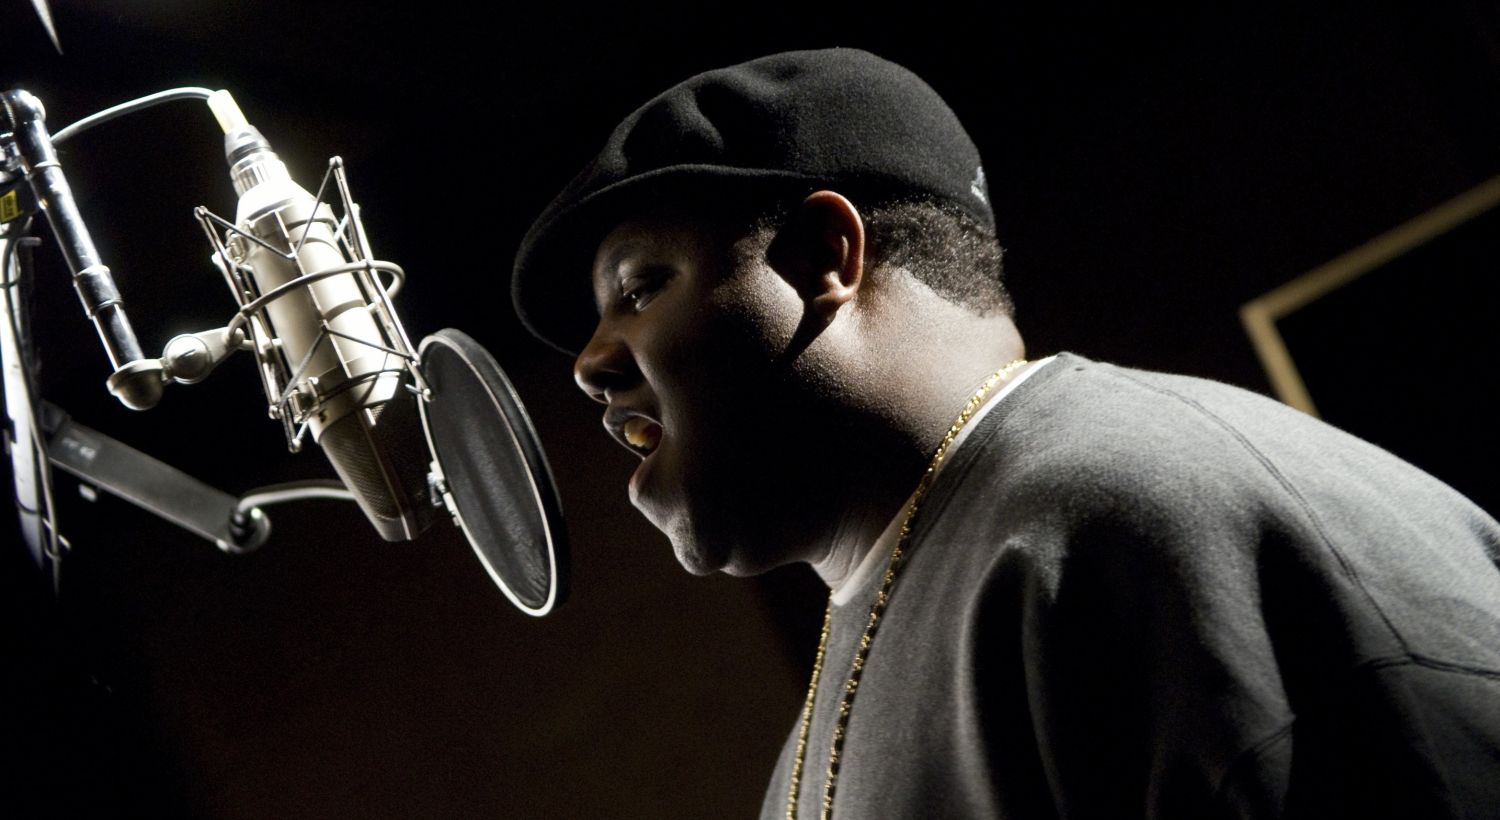 2. C.J. Wallace Plays Biggie Wallace, son of classic rapper and performer The Notorious B.I.G, played his father in the 2009 biographical film, Notorious. C.J. was merely a couple of months old when Biggie was shot and killed in Los Angeles.